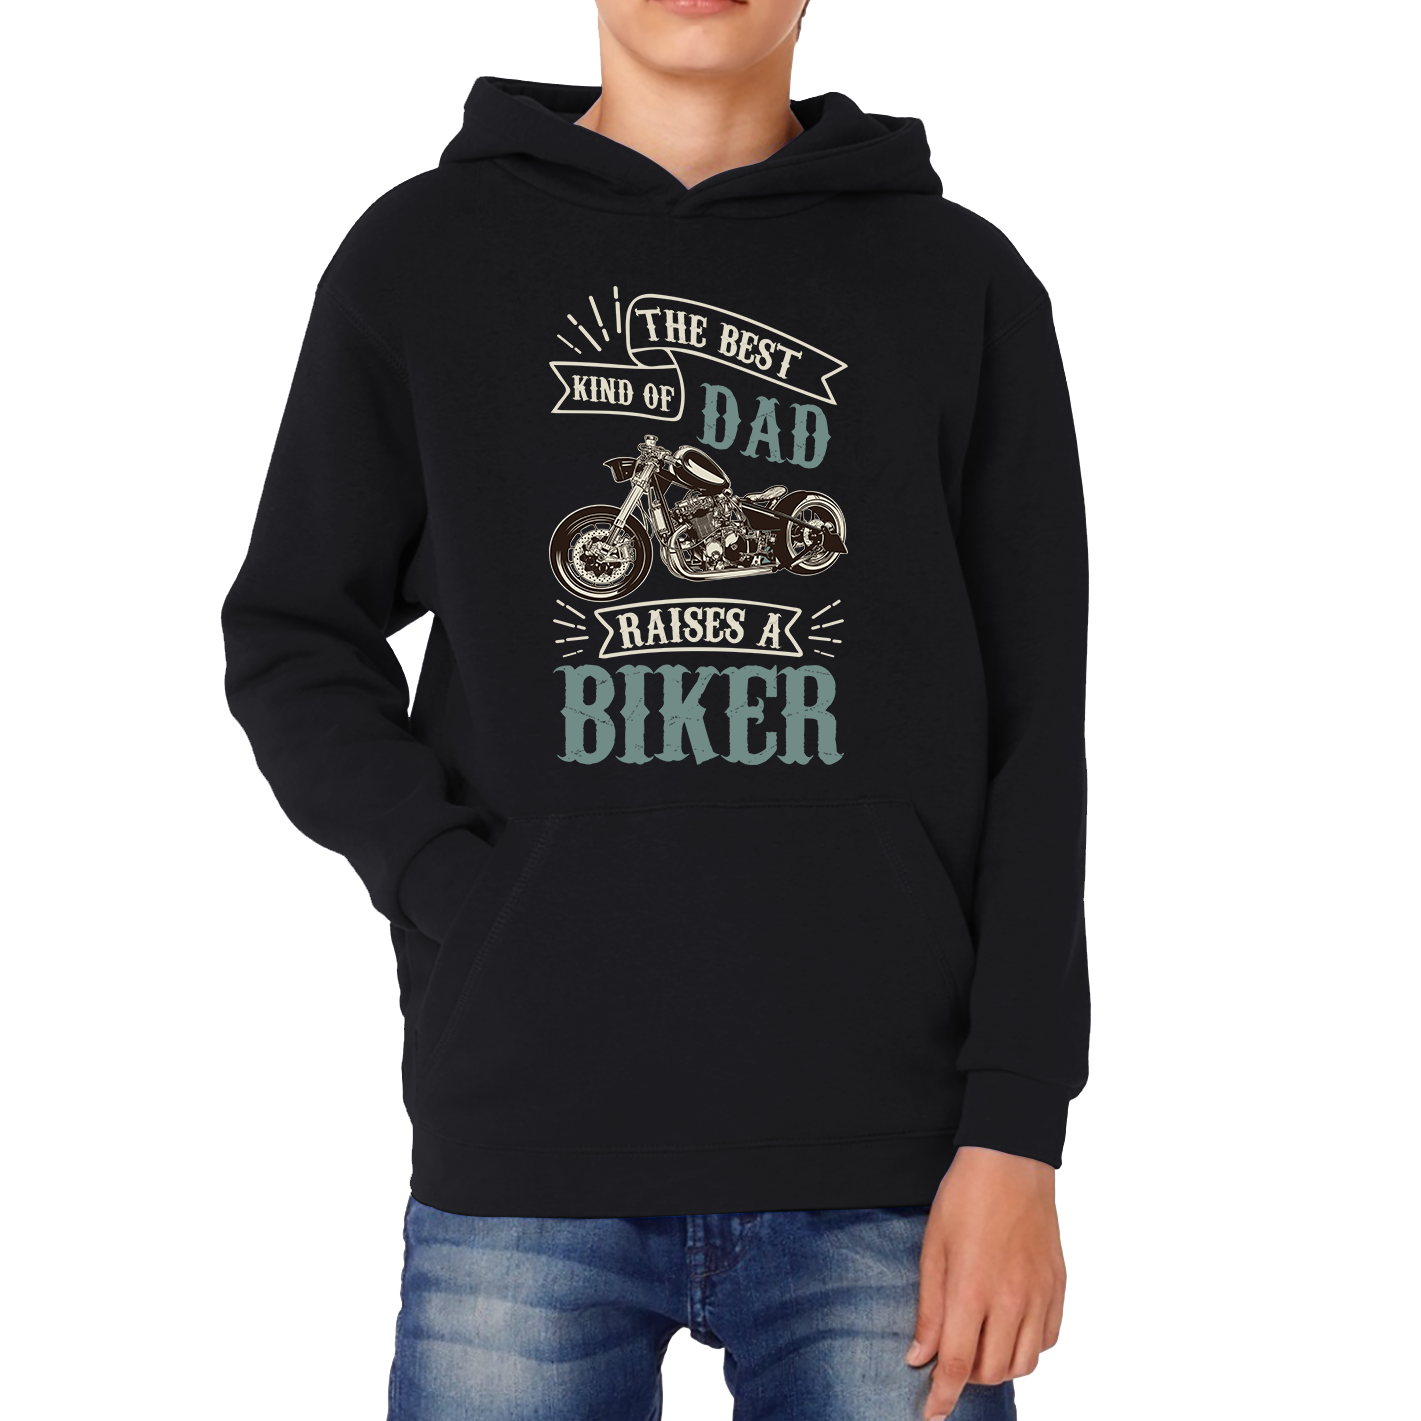 The Best Kind Of Dad Raises A Biker Hoodie Father's Day Funny Bike Lover Racers Kids Hoodie